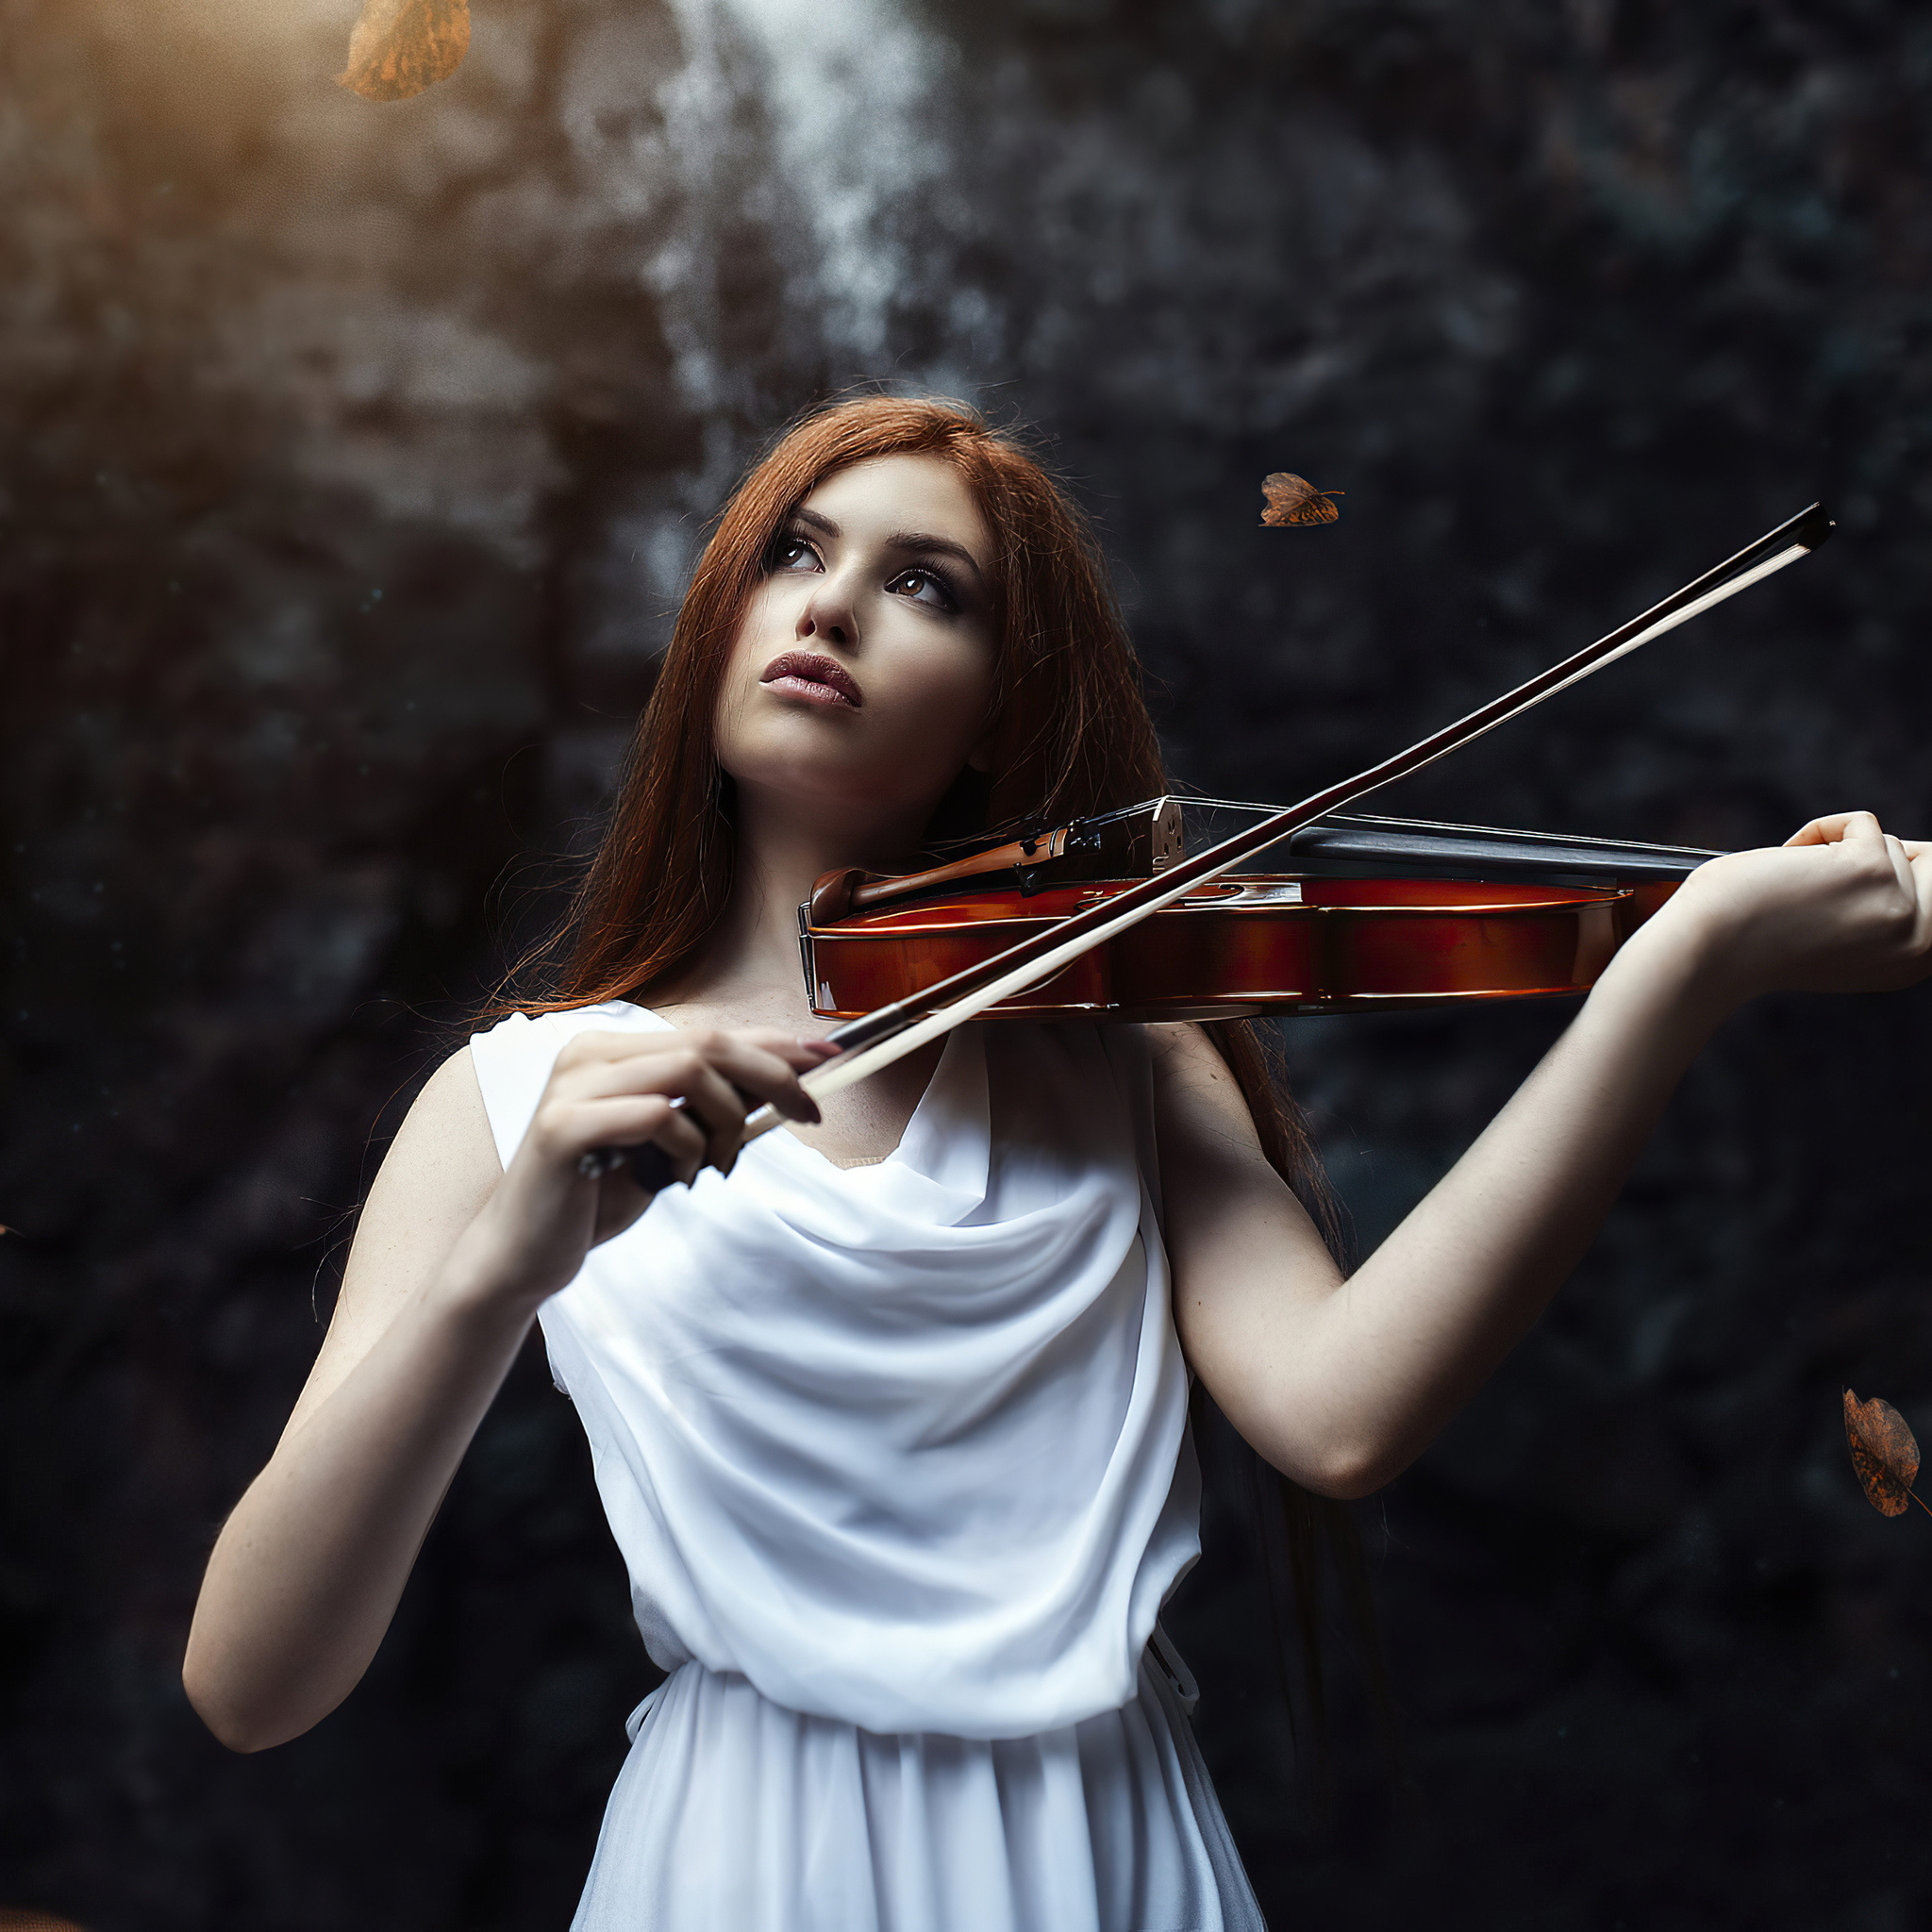 Violin: Classical Musical Instrument, Outdoor Concert, Violinist, Musician. 2050x2050 HD Wallpaper.